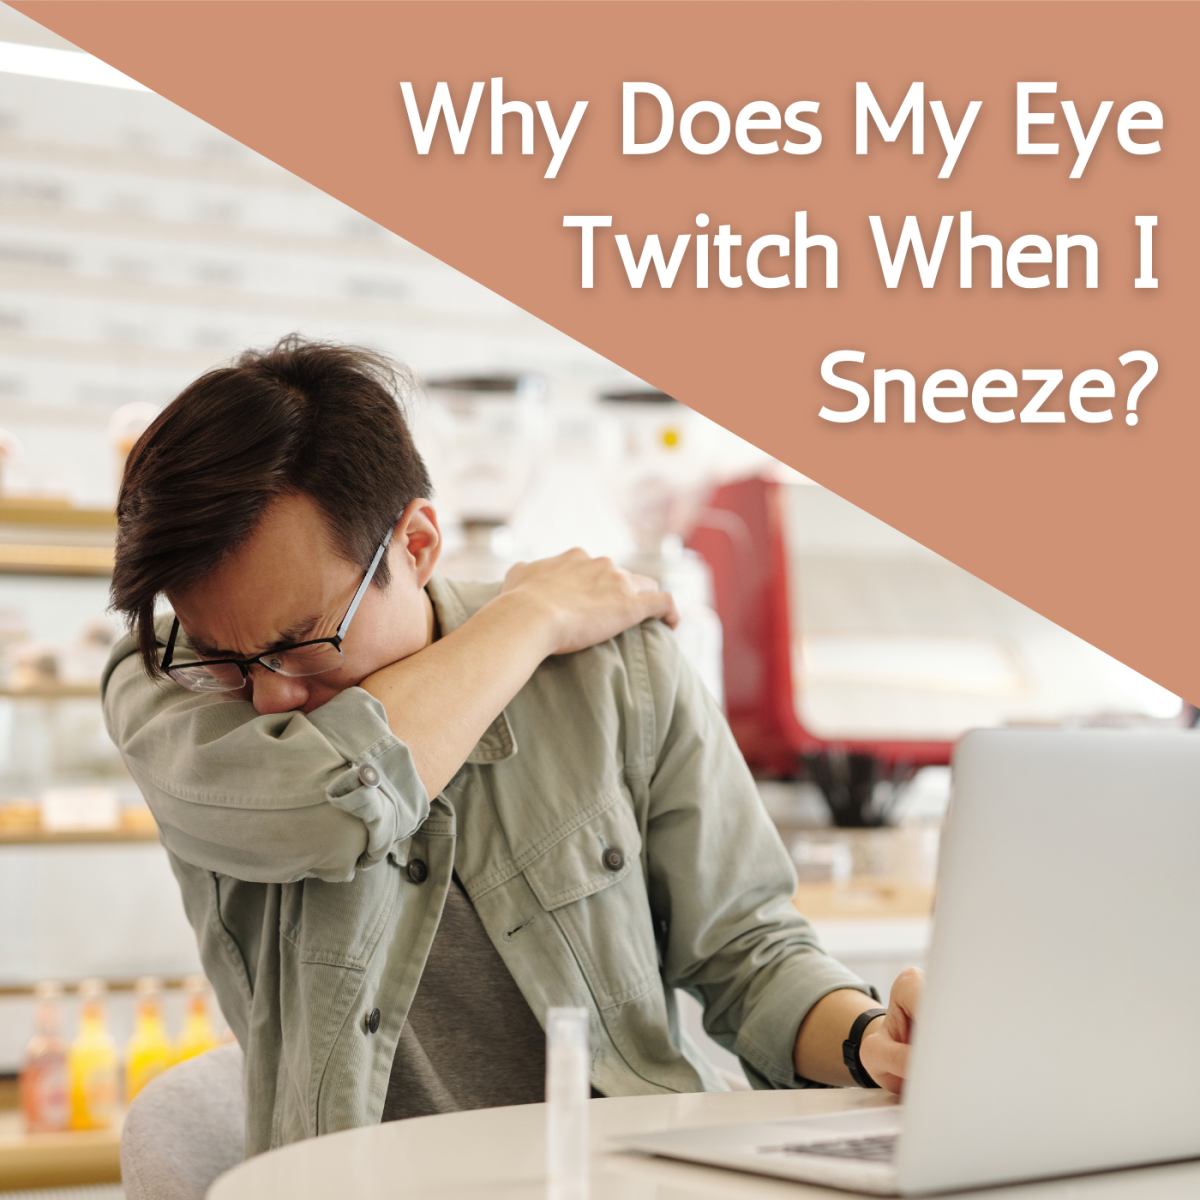 Is it normal for your eye to twitch after sneezing?